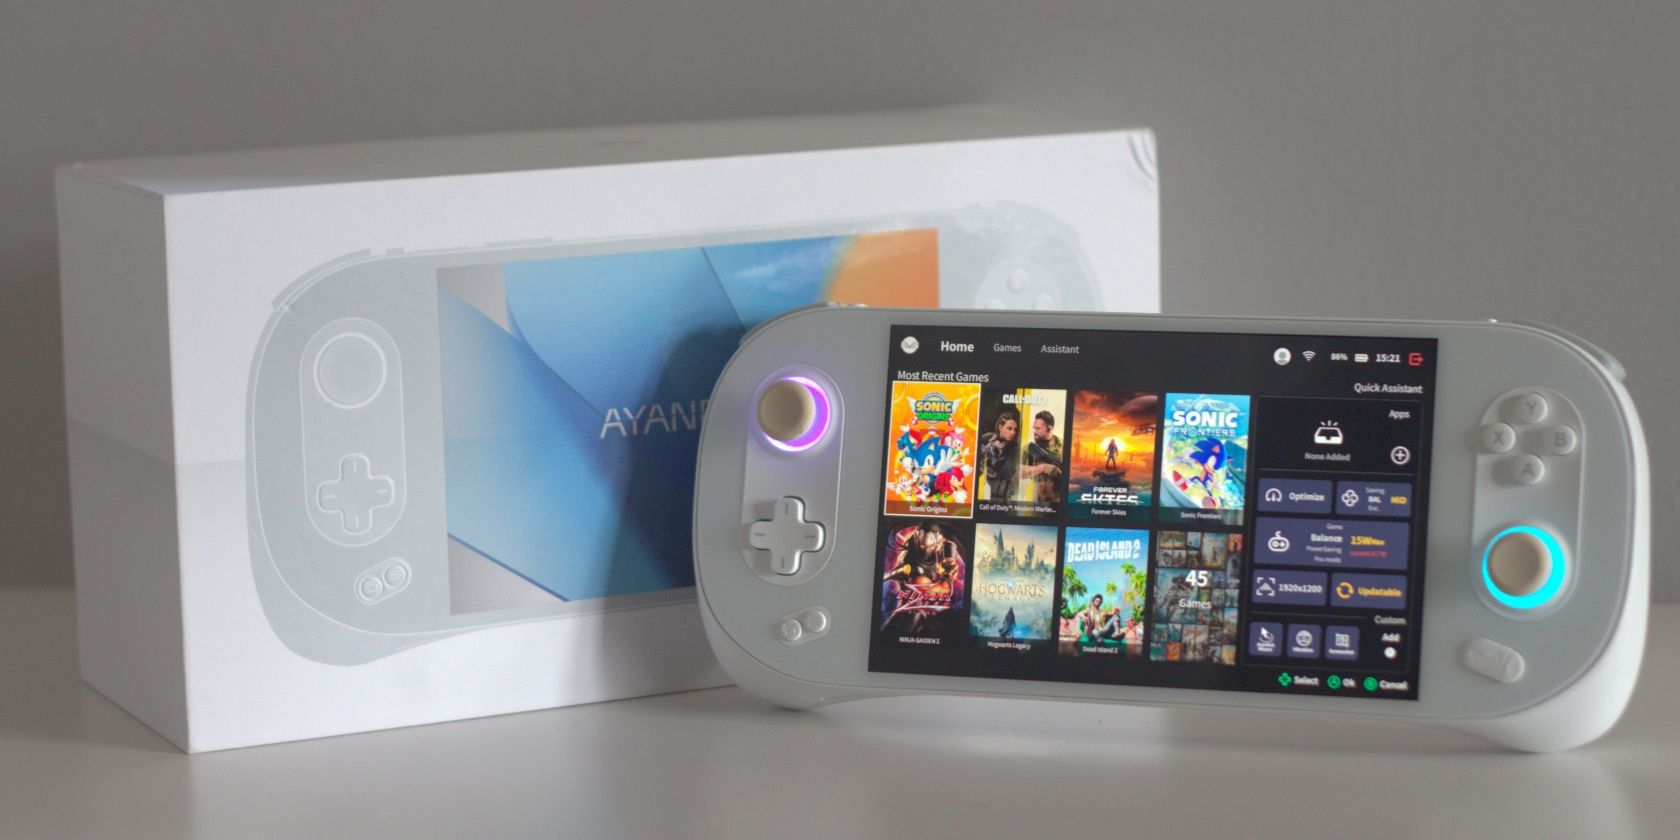 AYANEO 2S Product Photo showing a white handheld gaming PC sat in front of its own box on a white table with a white background